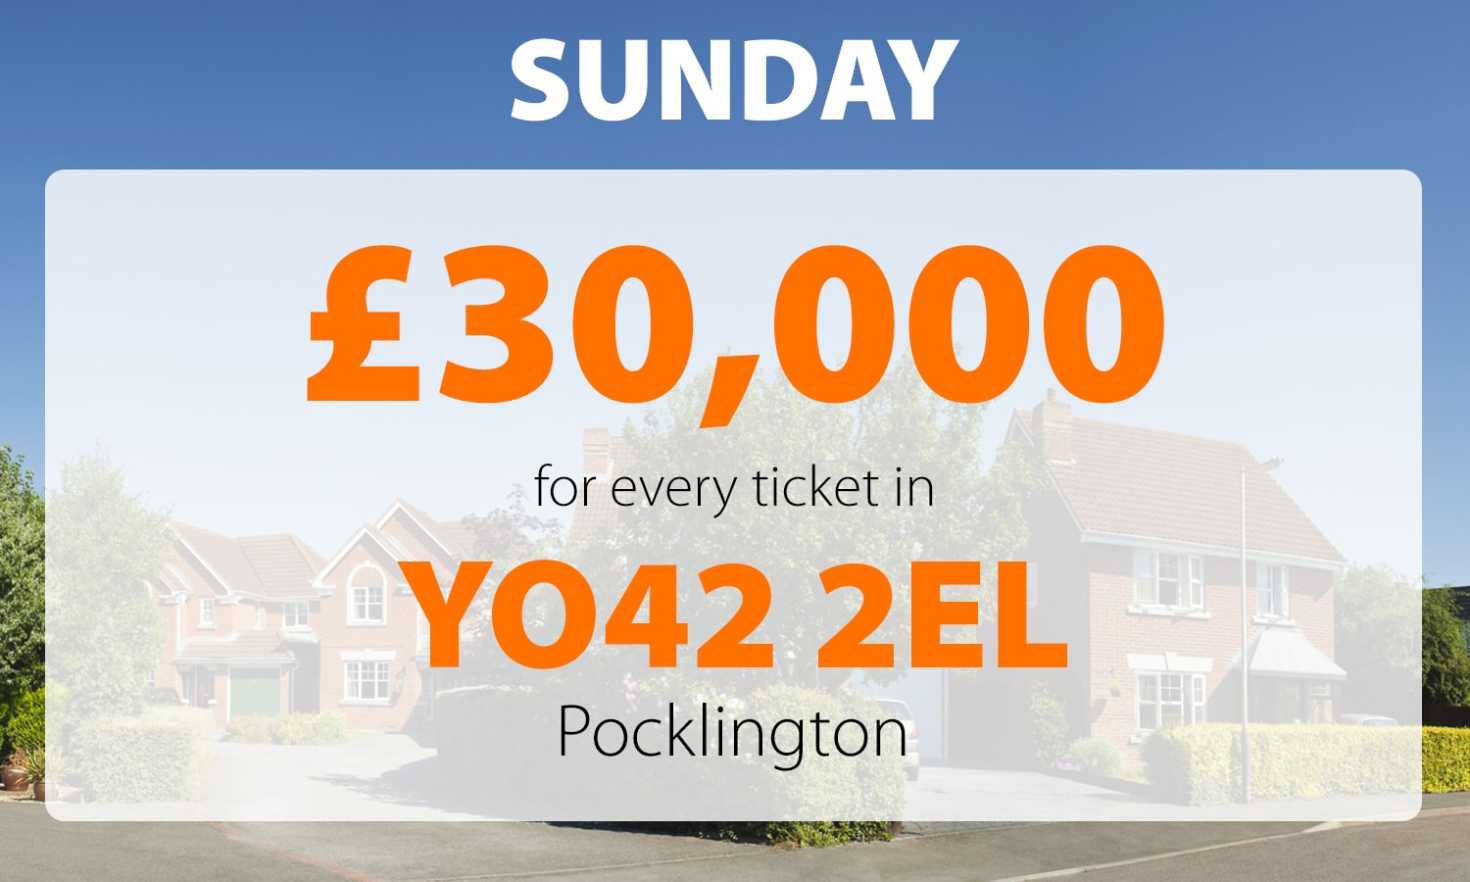 Lucky Pocklington players have won big in Sunday's Street Prize